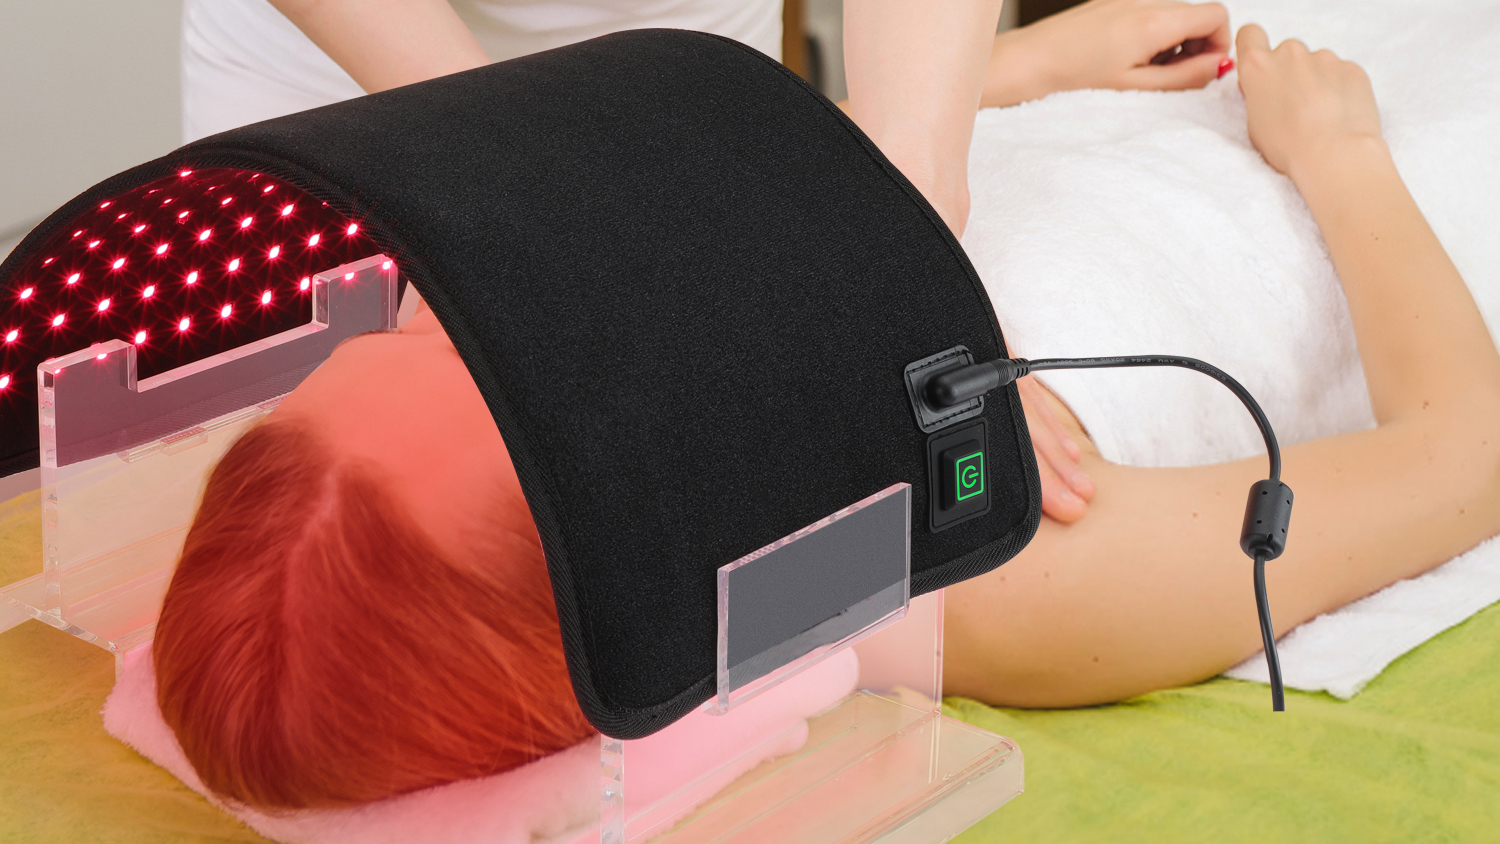  Wholesale red light therapy wrap walgreens with good price - Kinreen 